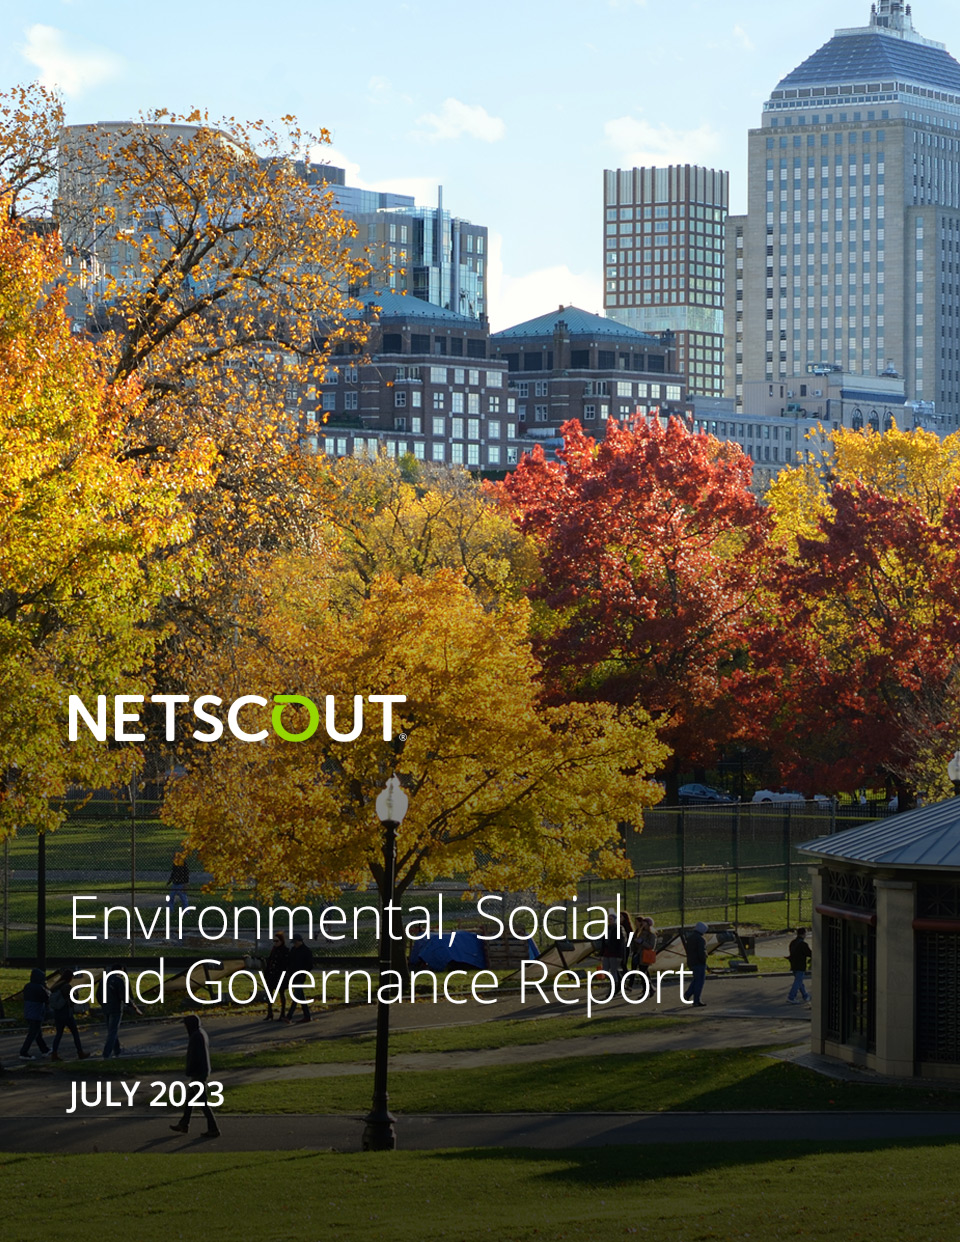 NETSCOUT Environmental, Social, and Governance Report July 2023